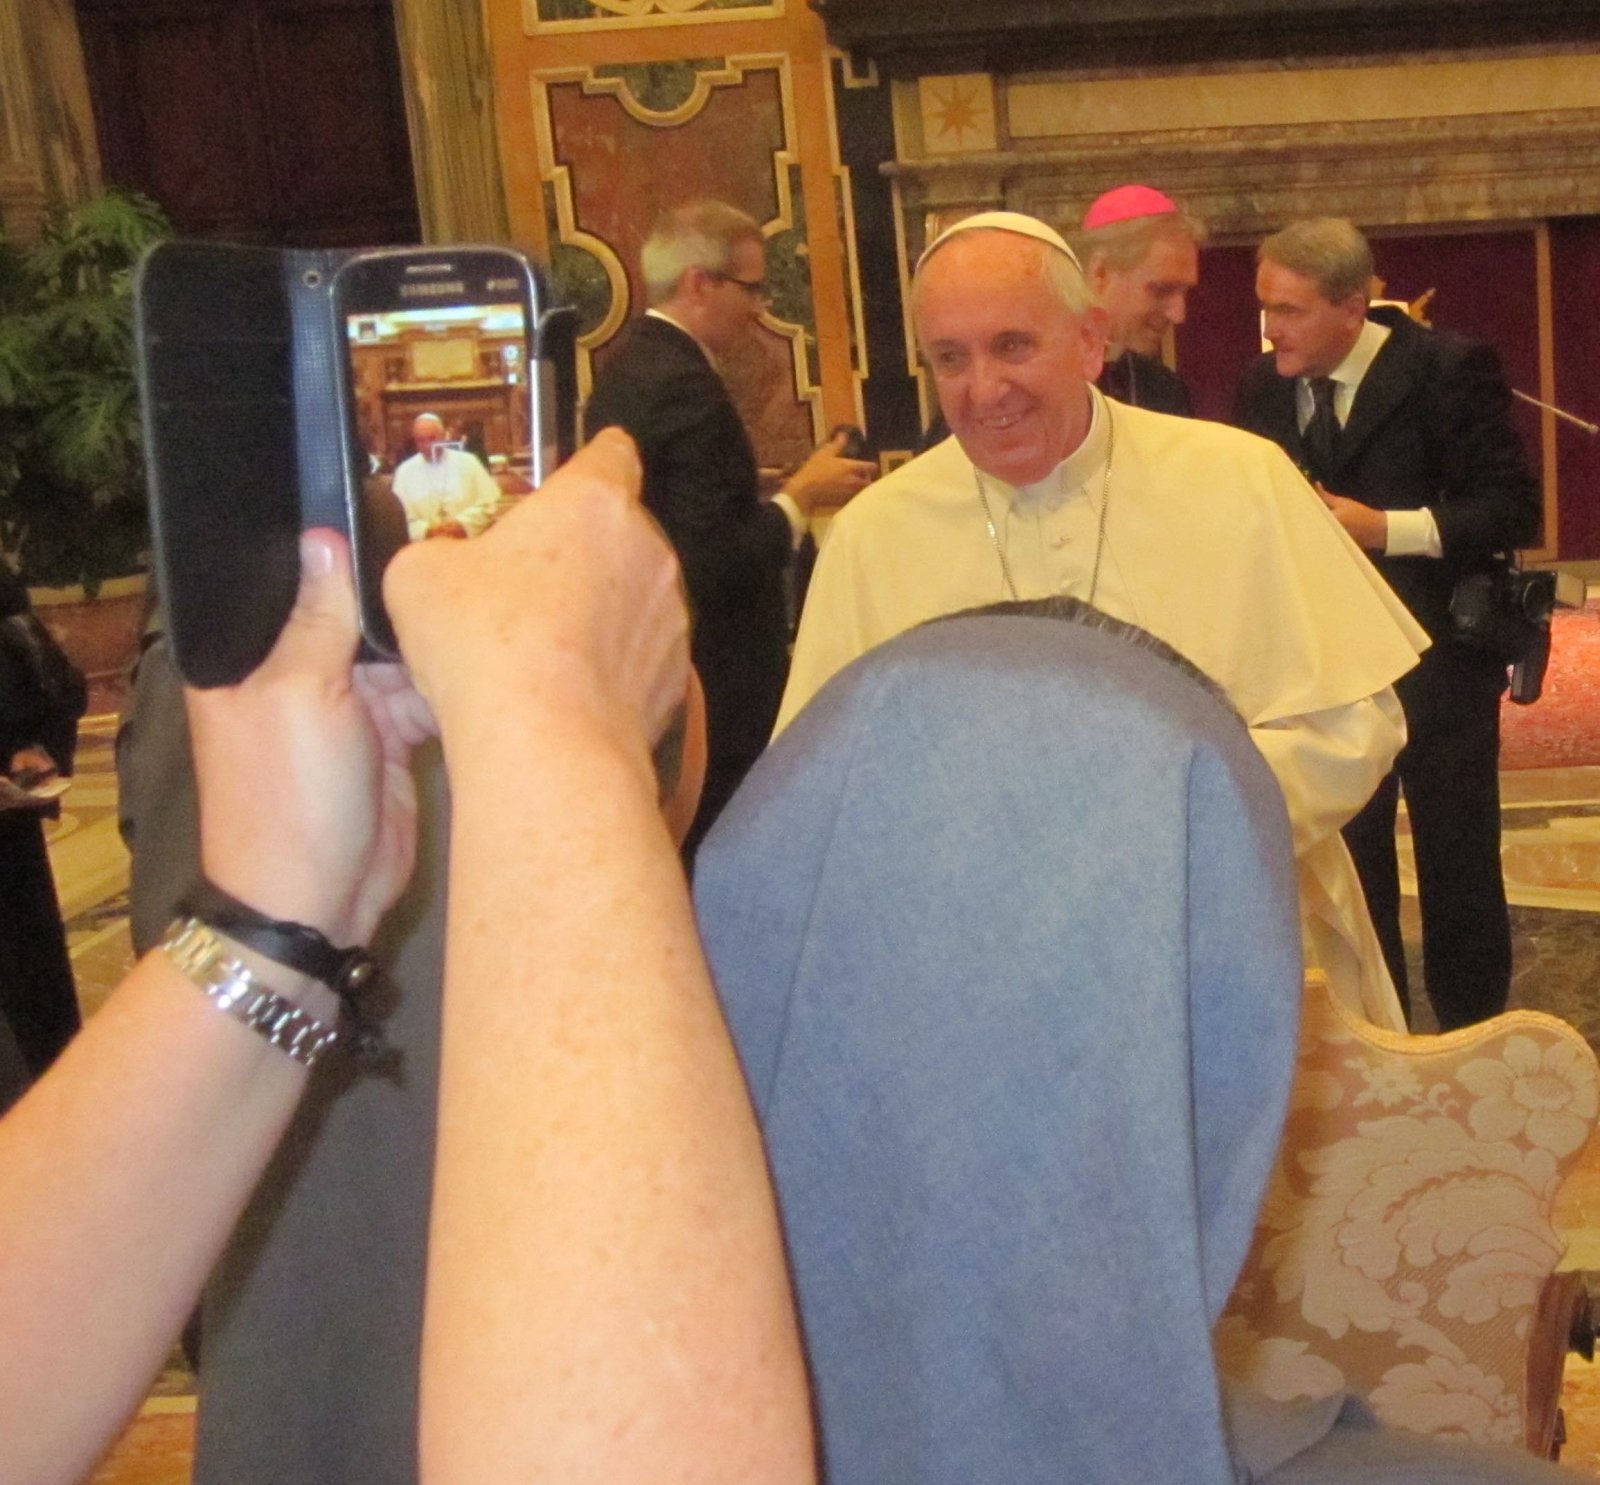 MEETING THE POPE